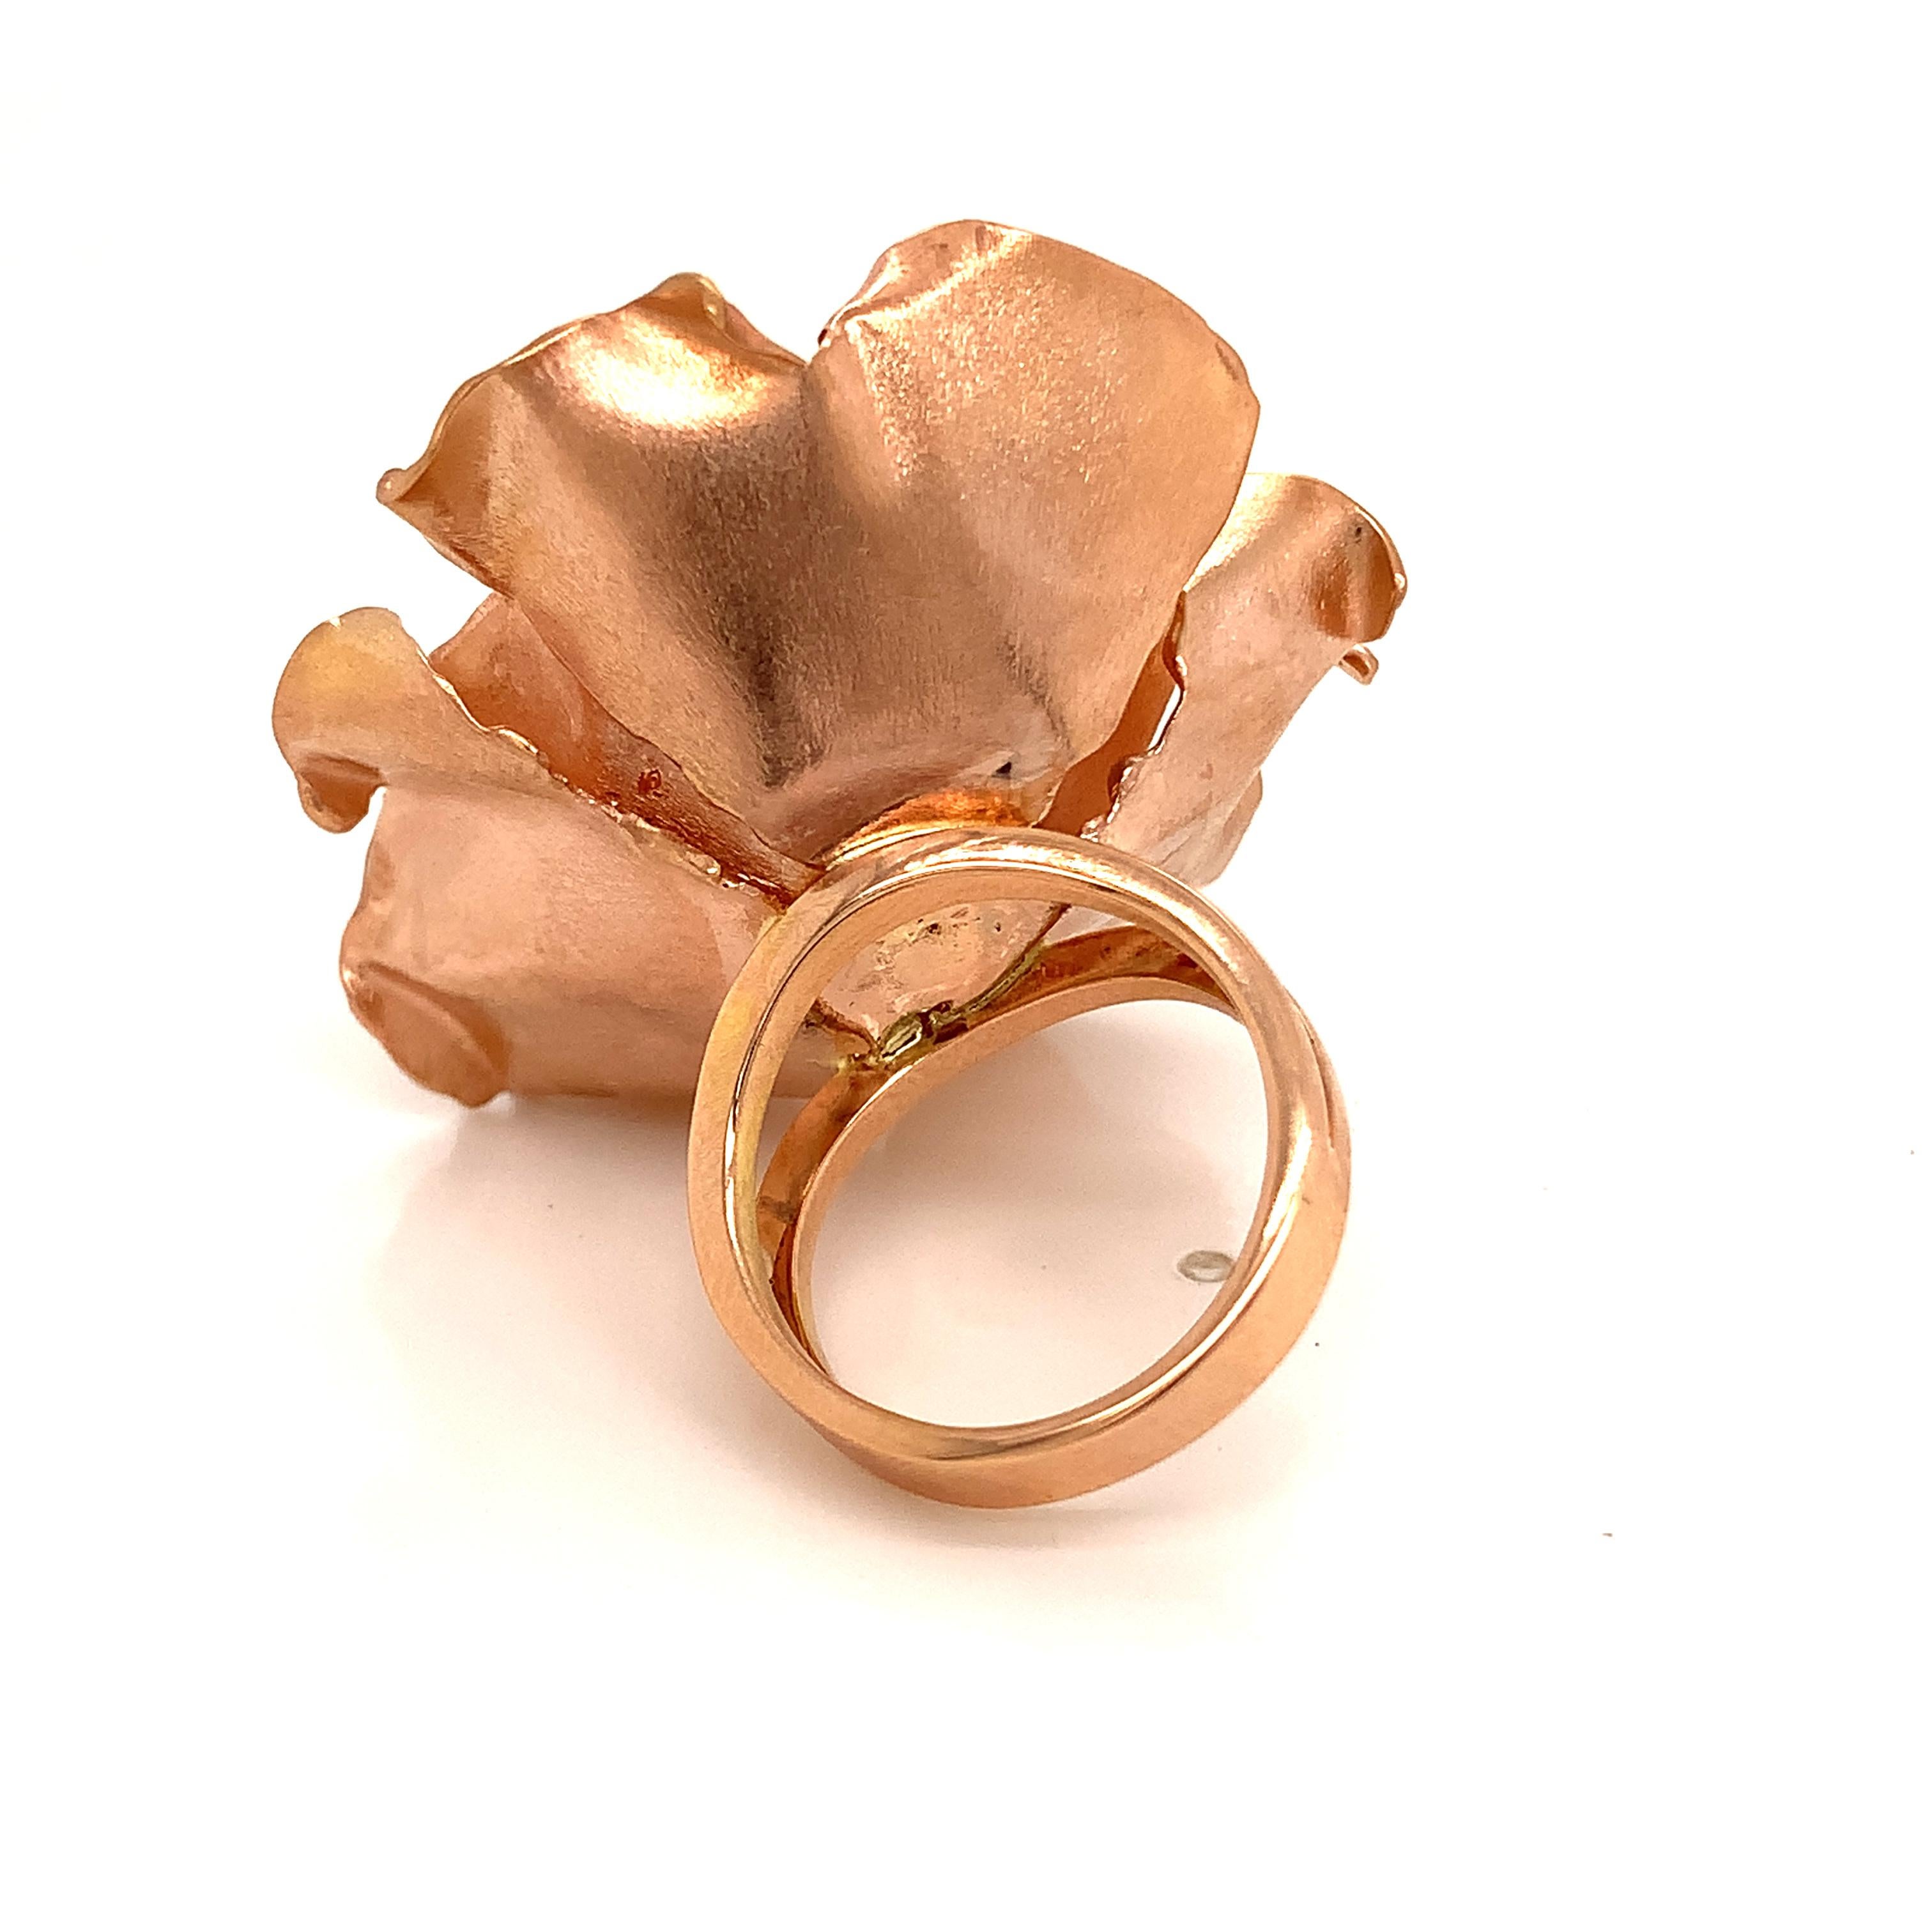 18KT Rose Gold Handmade  Garavelli  FLOWER  RING with White Diamonds 
rings size 6.25 US size 53 EU 
Flower diameter  mm. 40
GOLD  : grams 19
DIAMONDS ct : 0,45
Made In Italy in Valenza. It is a one of a kind piece. The precious hands that shaped 